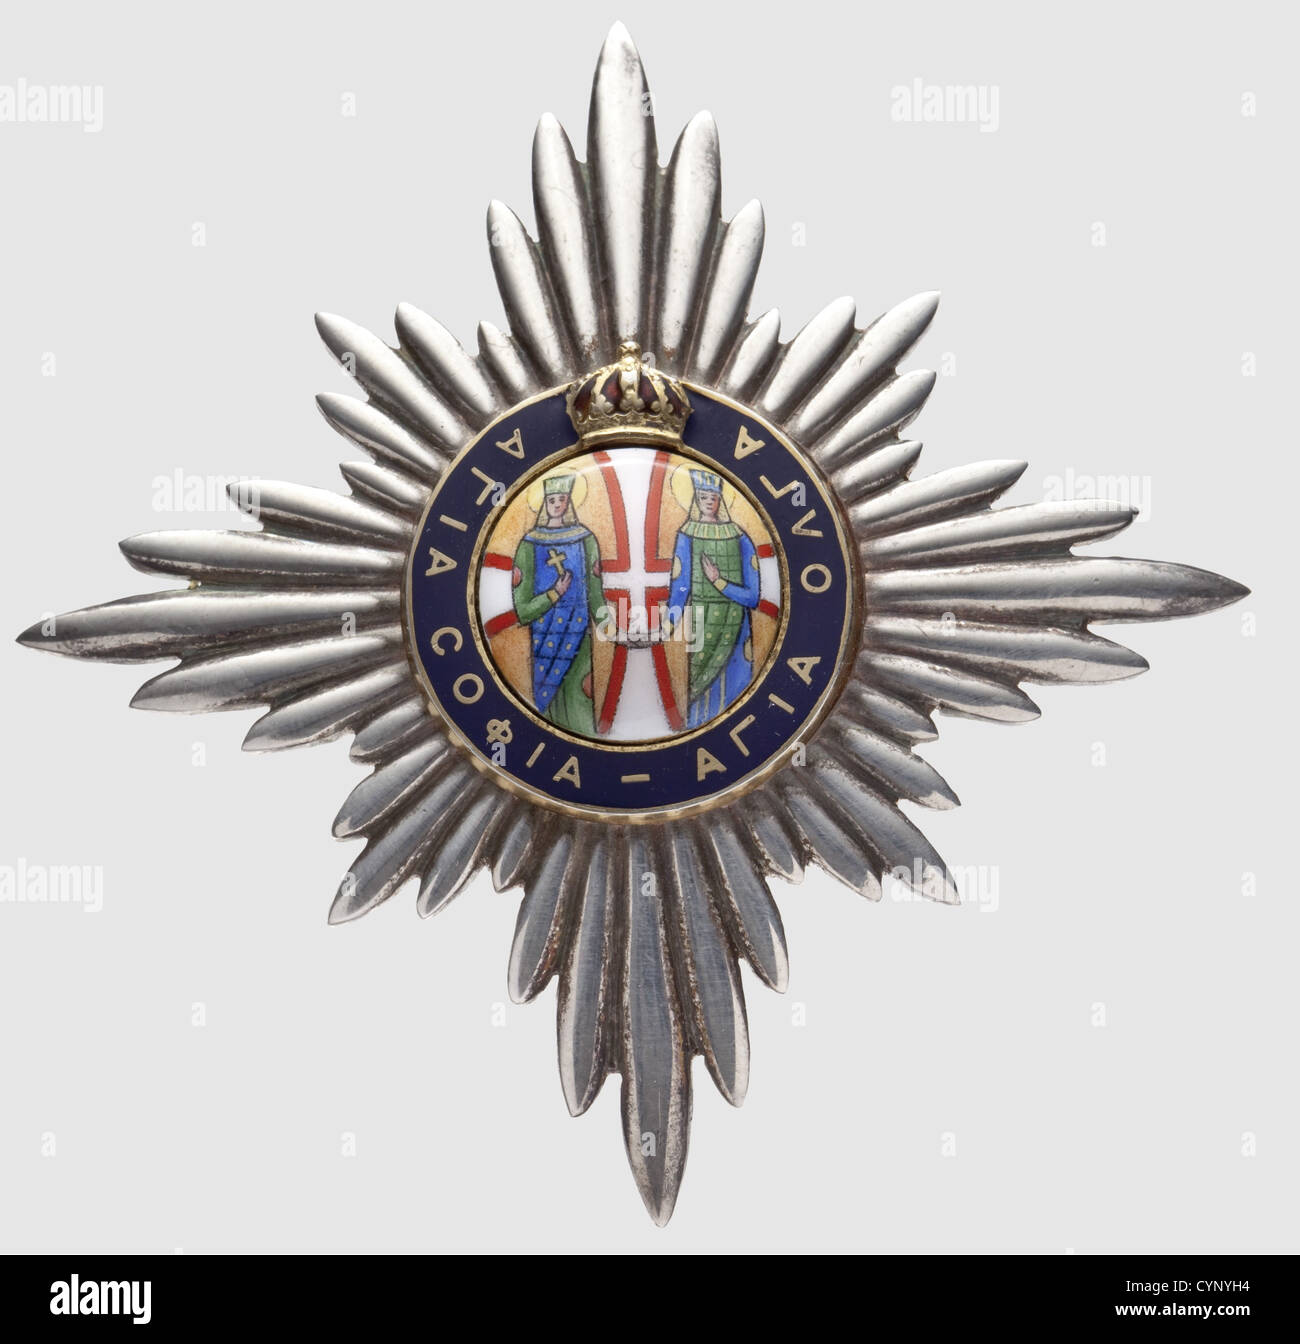 House Order of St. Olga and St. Sophia, Star to the Grand Cross Decoration. Gilt silver, enamelled. Maker Spink & Son, London. Very rare (Zei 968), historic, historical, people, 19th century, medal, decoration, medals, decorations, badge of honour, badge of honor, badges of honour, badges of honor, object, objects, stills, clipping, clippings, cut out, cut-out, cut-outs, Additional-Rights-Clearences-Not Available Stock Photo